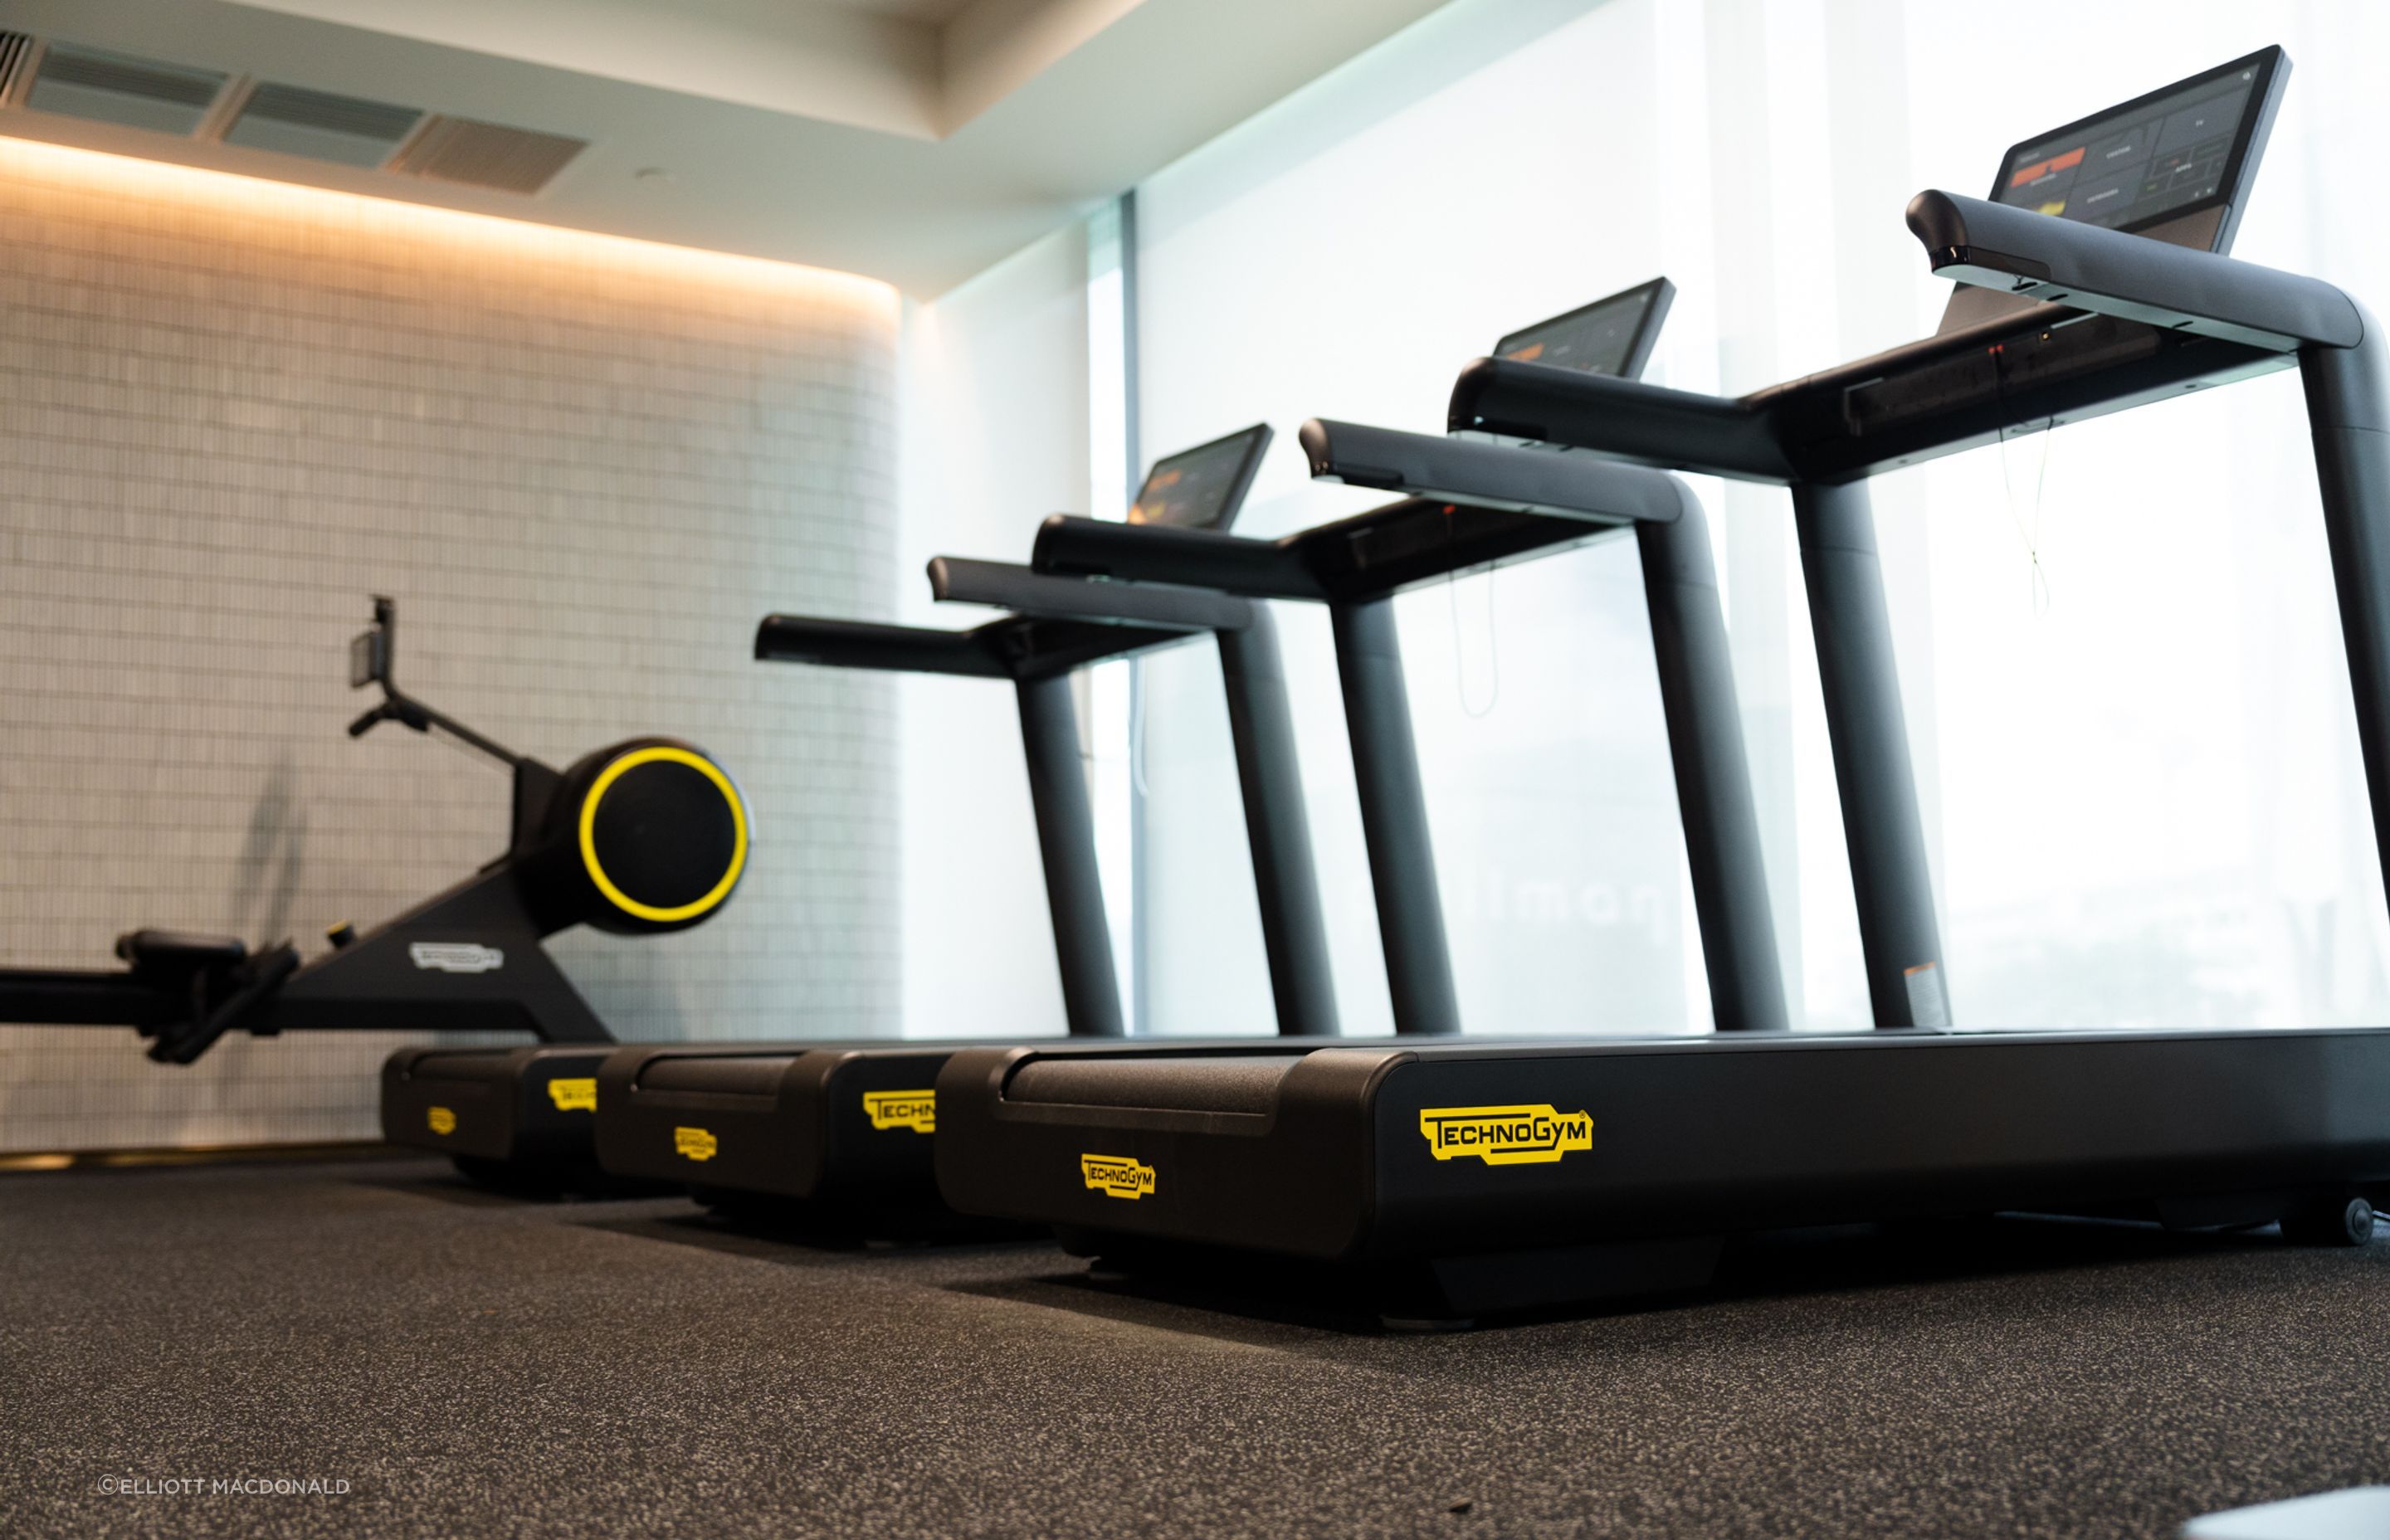 The Technogym exercise equipment at the Pullman Auckland Hotel allows for cardio, strength, stretch, recovery and functional training.